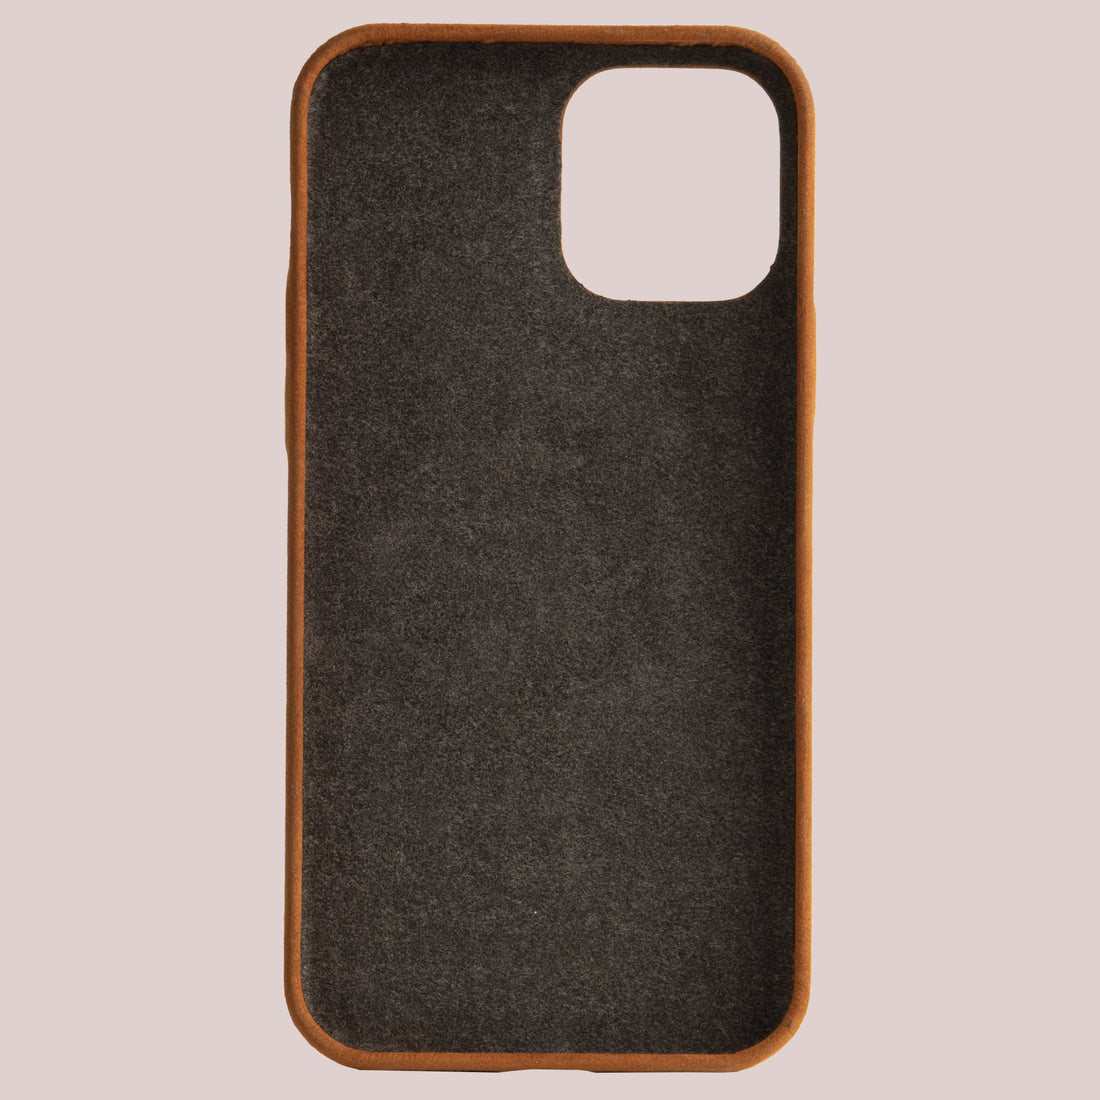 Kalon Case for iPhone 12 Mini series with MagSafe Compatibility - Vintage Tan